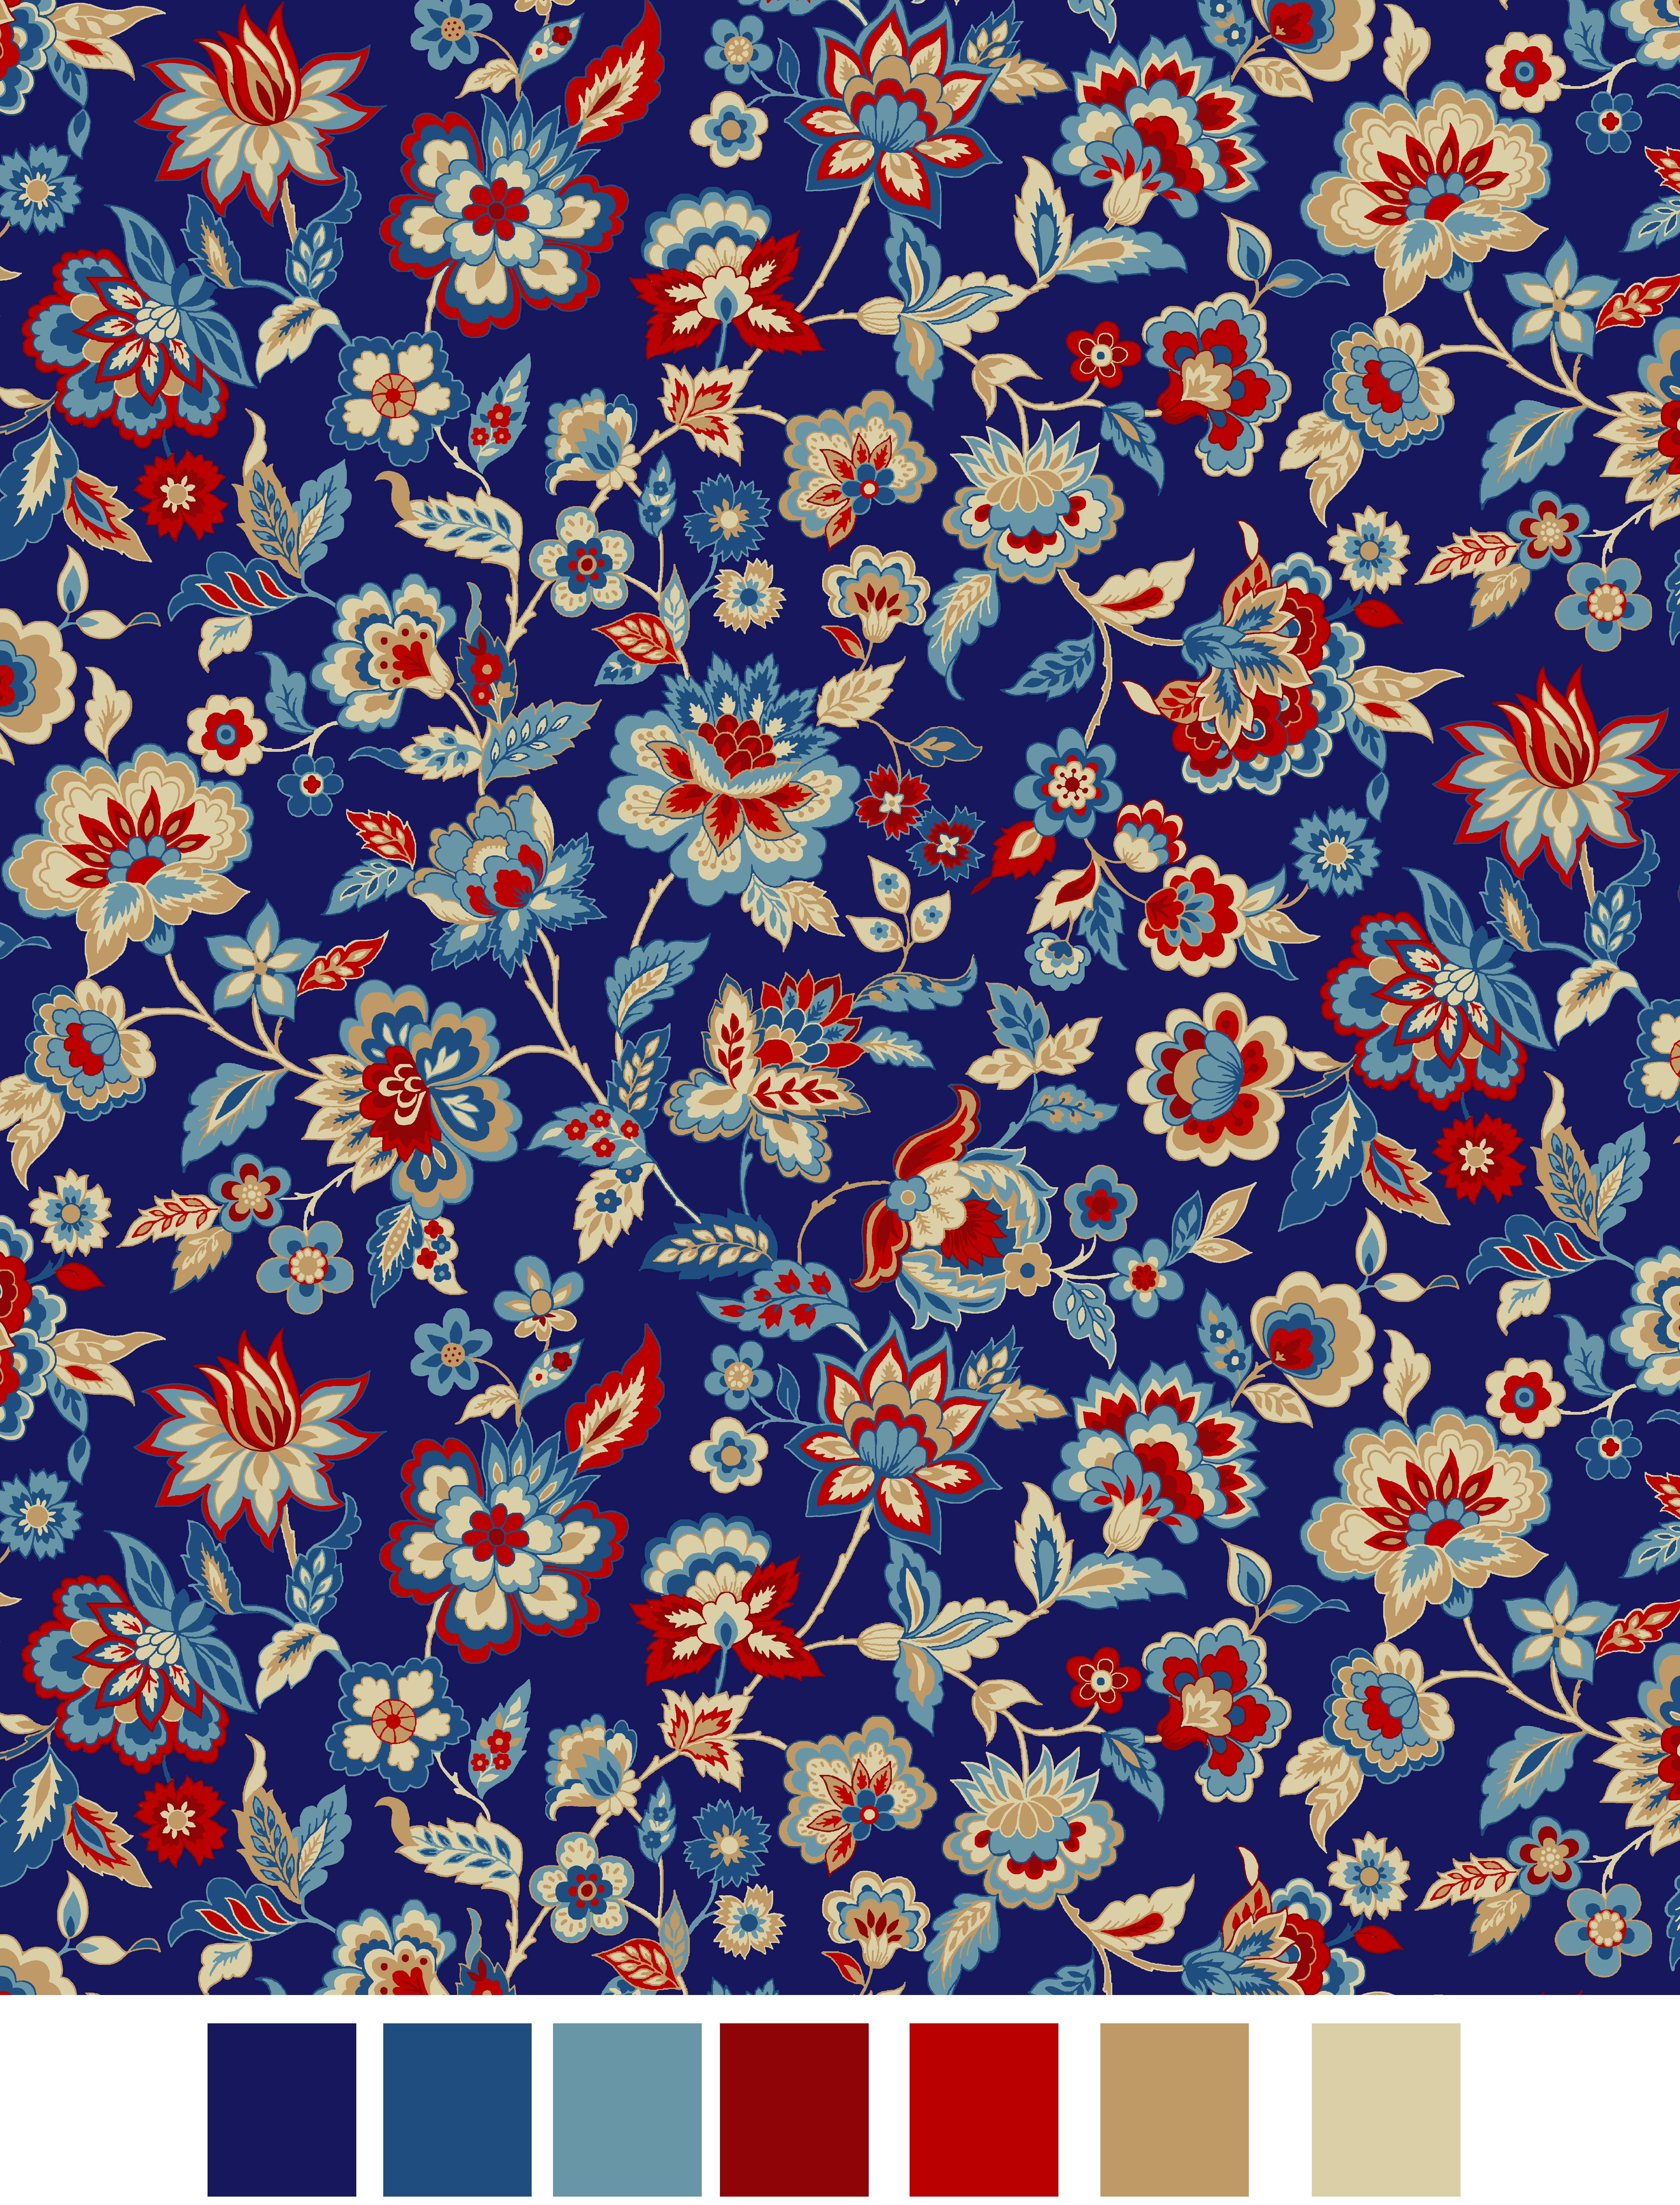 rtc-fabrics-laurens-floral-jacobean-blue-100-cotton-fabric-by-the-yard